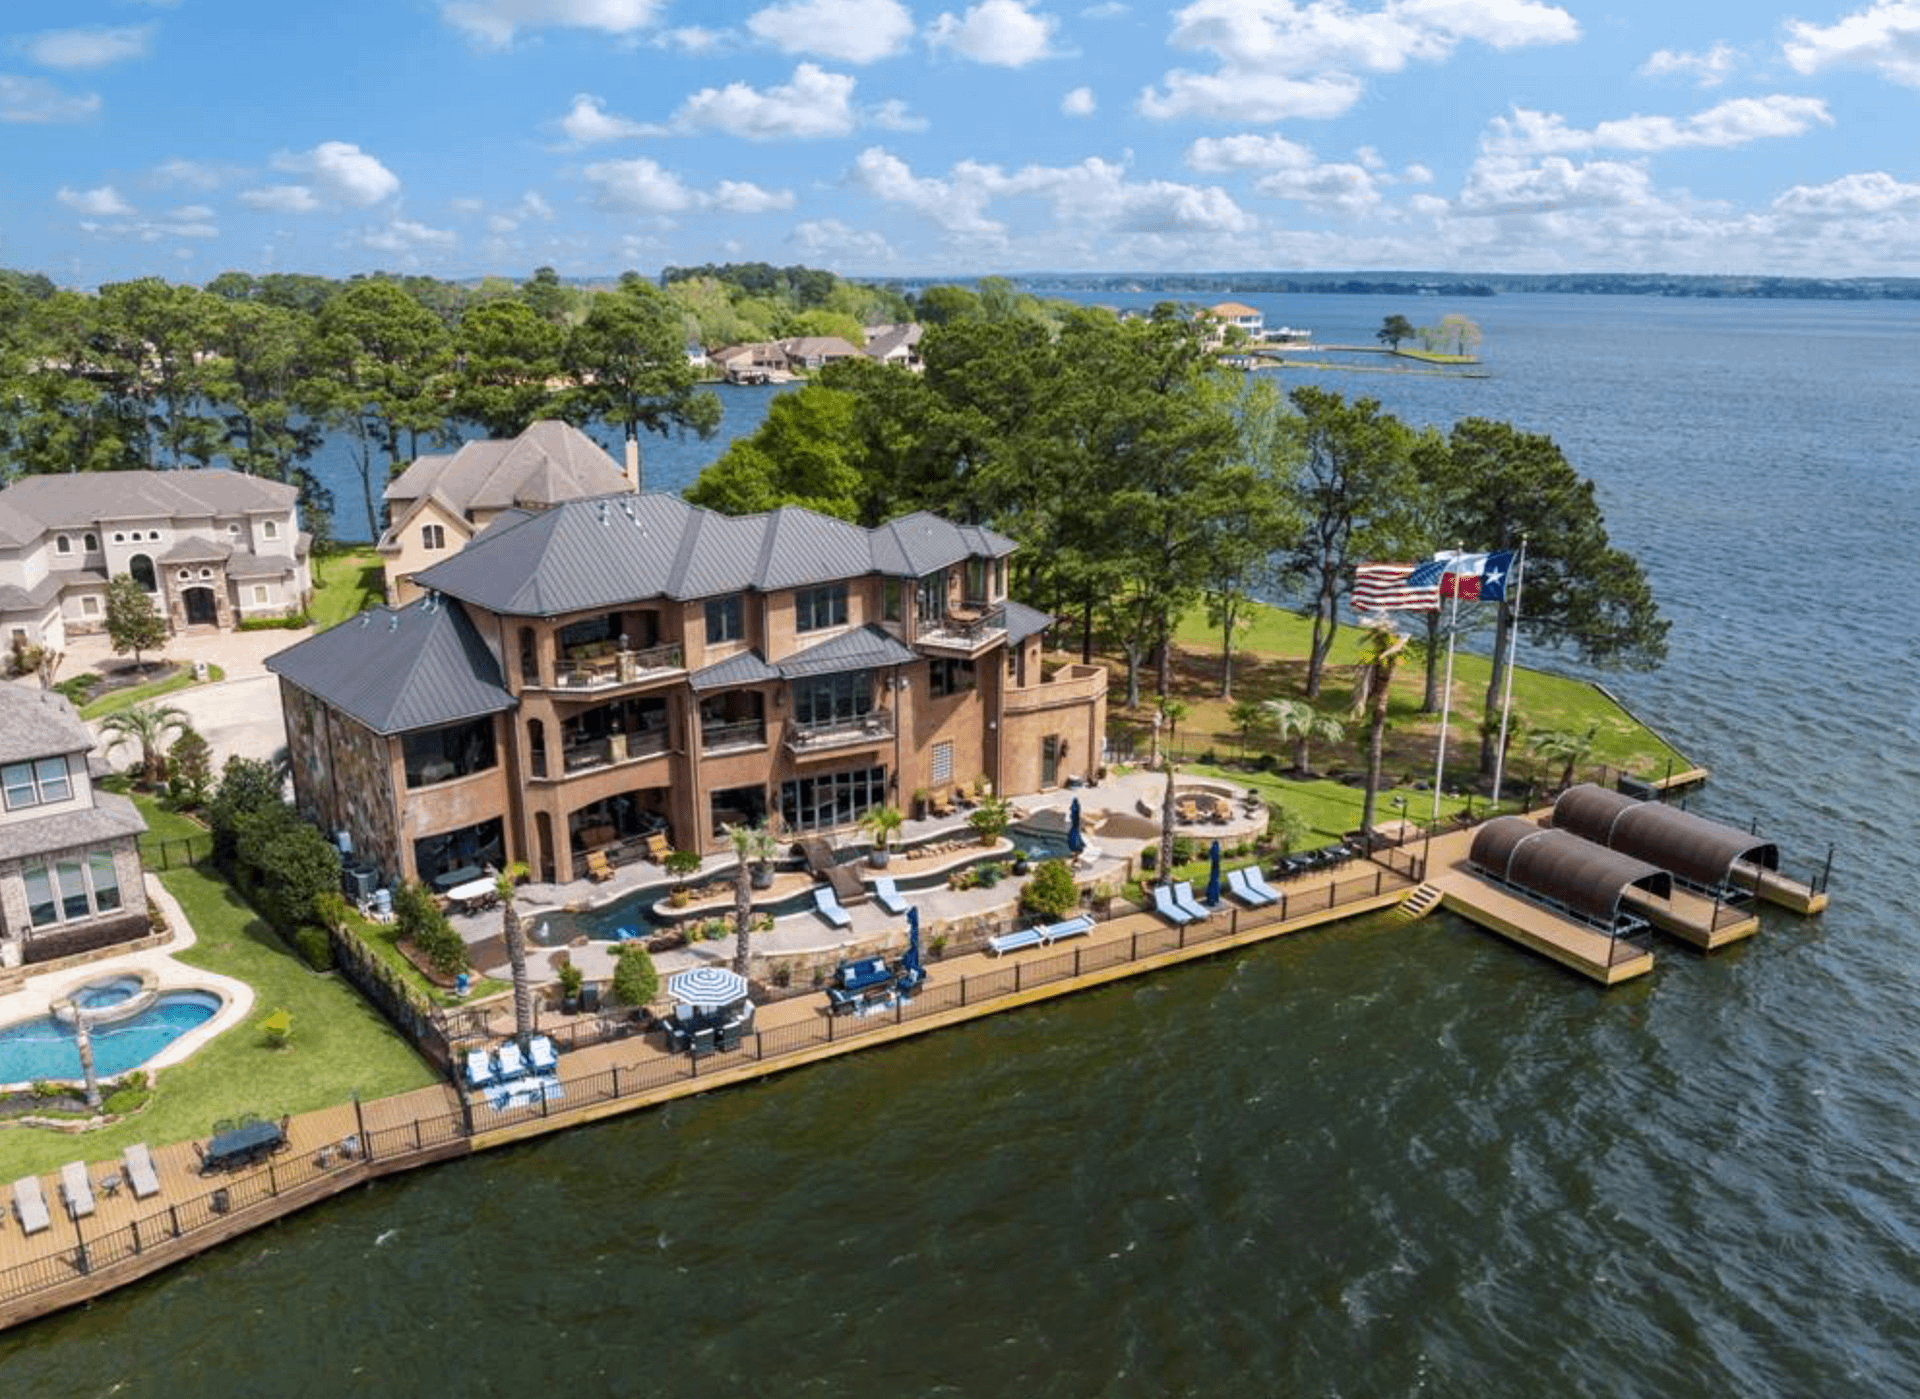 Lakefront Texas Home With Lazy River (PHOTOS)